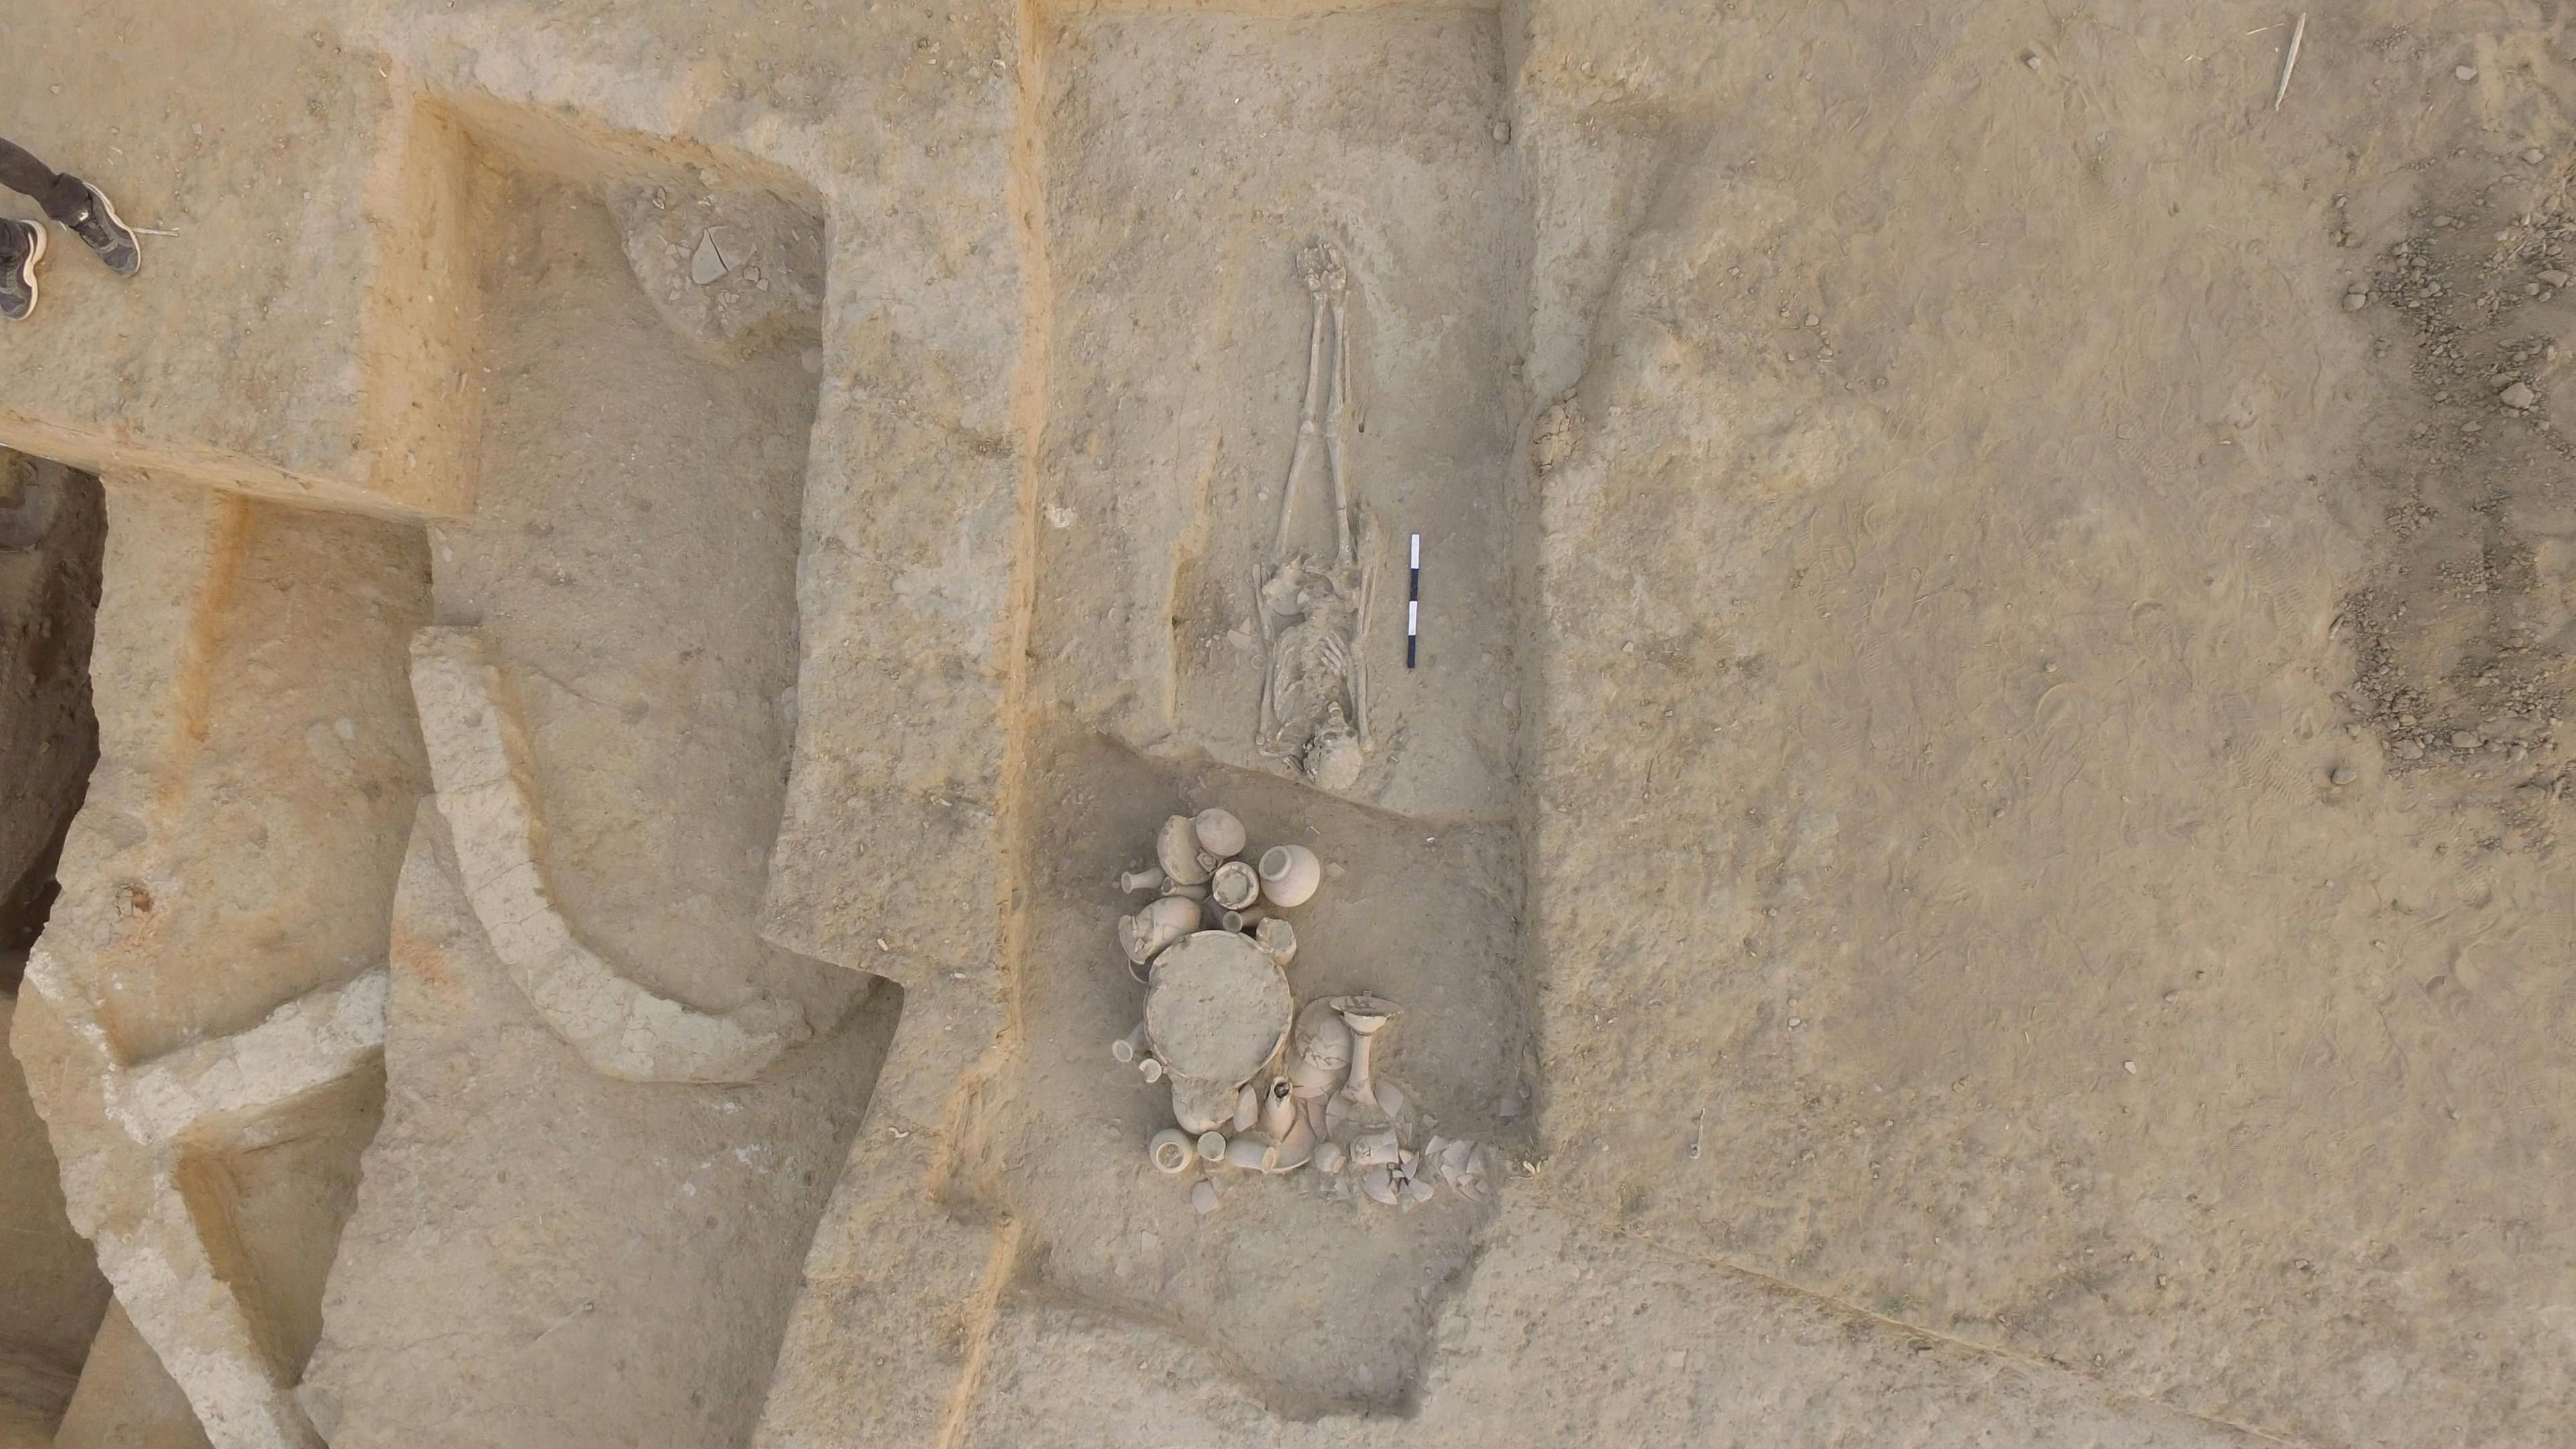 The Harappan Burials at RGR 7 | Archaeological Survey of India